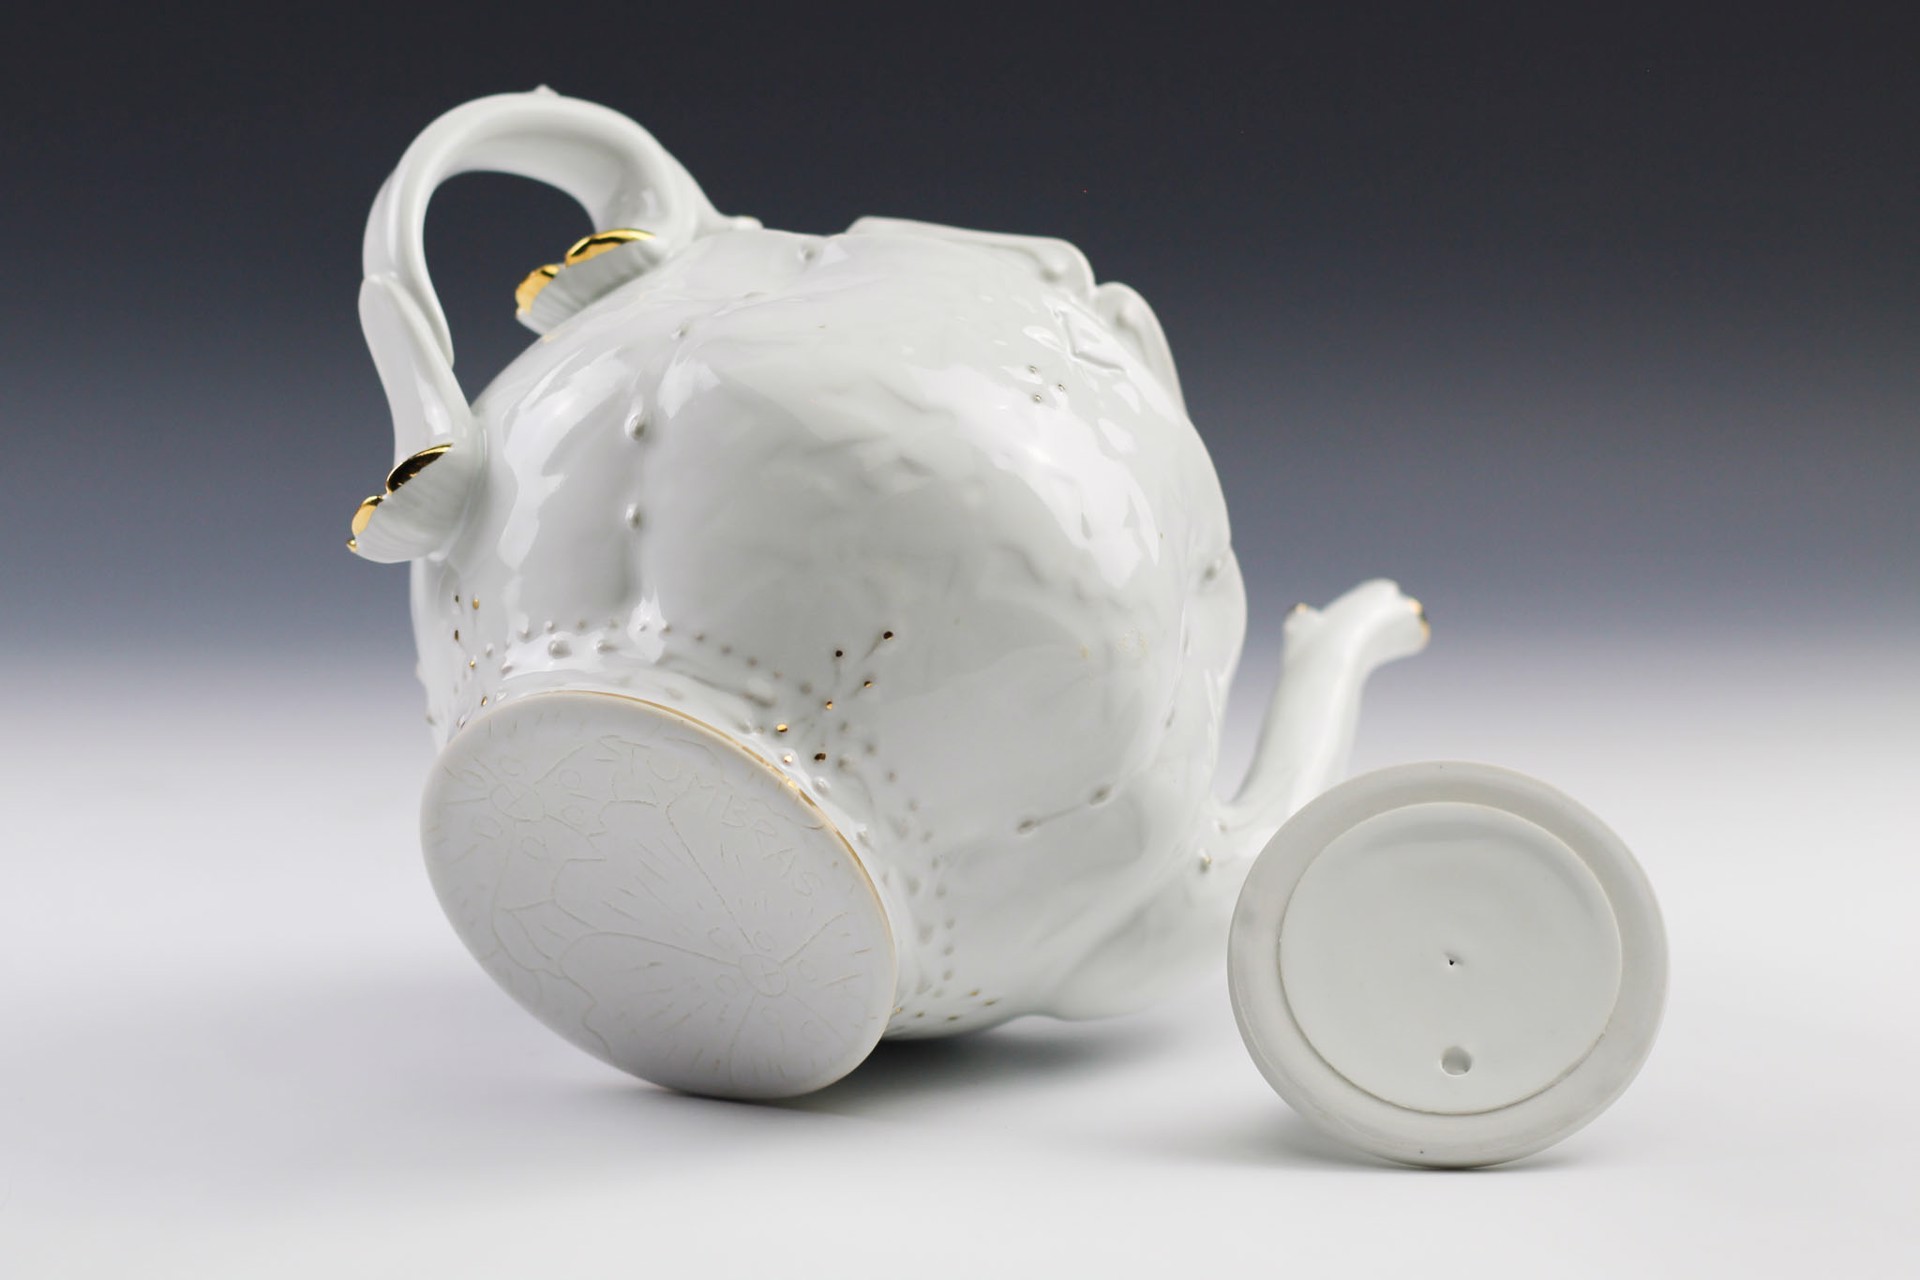 Teapot with Laurel and X by Mike Stumbras